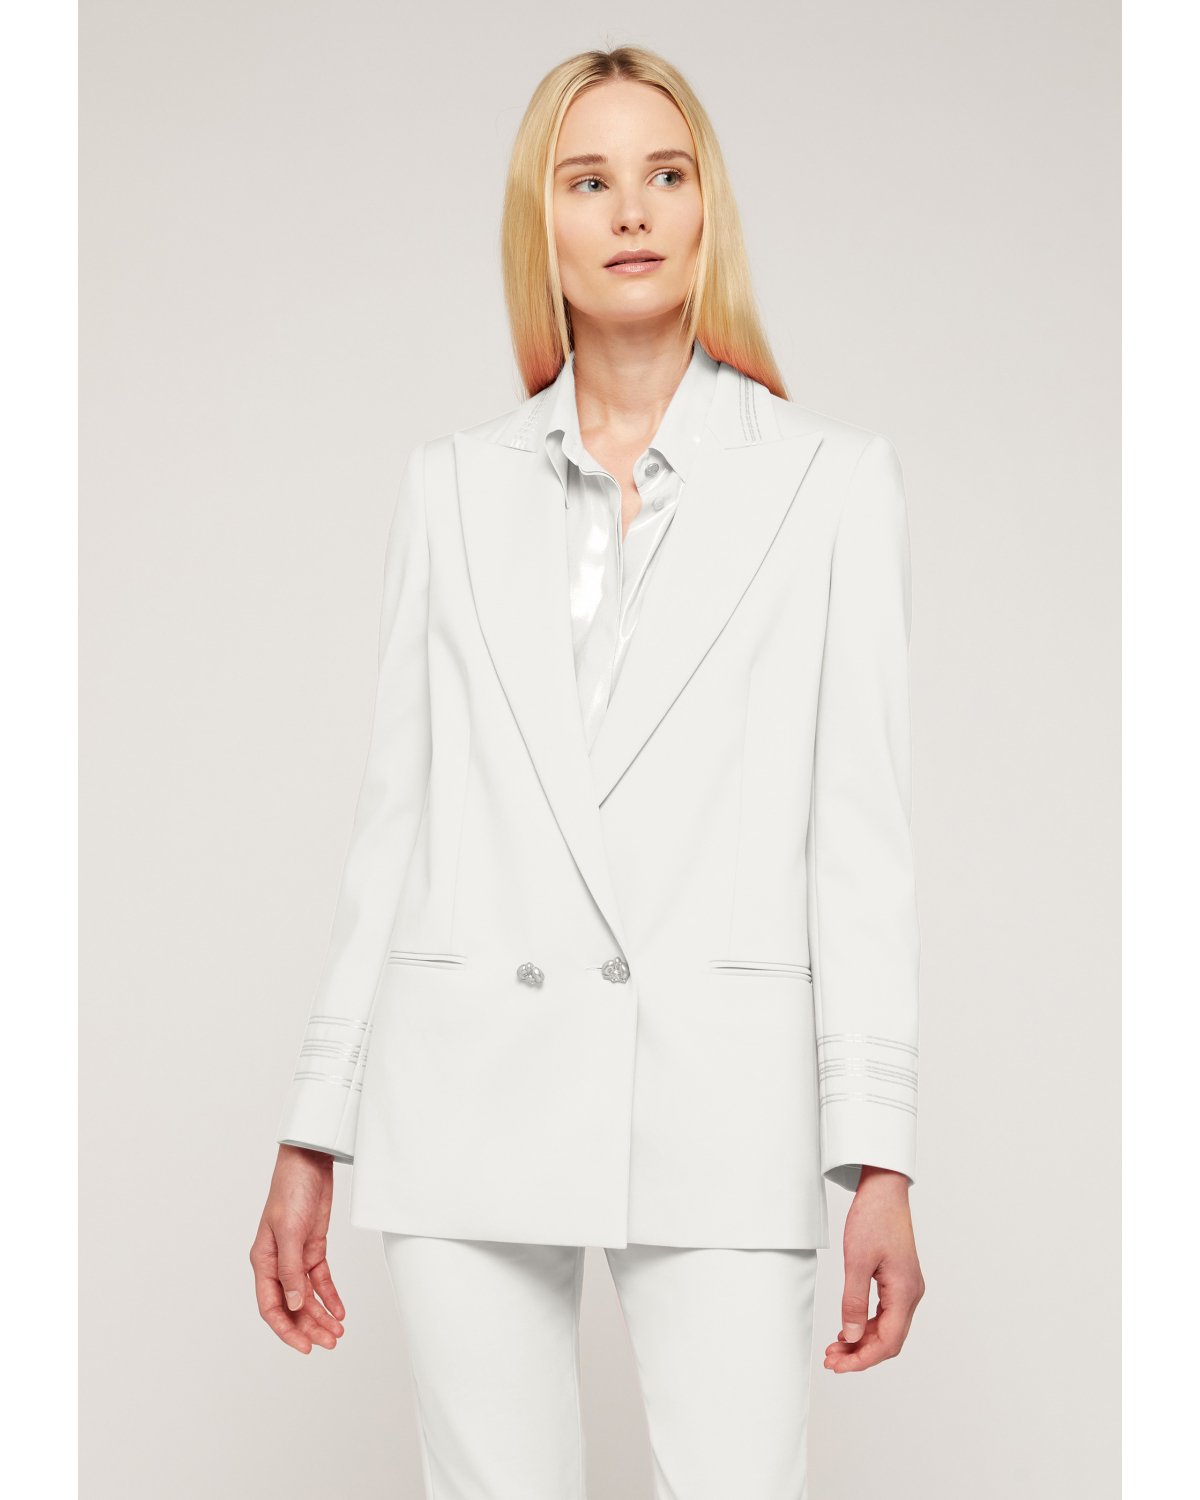 Long white blazer | Spring Summer 2023 Collection, 73_74, Cruise 2023 Collection, Warm weather wear, Ready to Wear, Spring days, Spring suits, Mid season sale -40%, Summer Sale | Genny